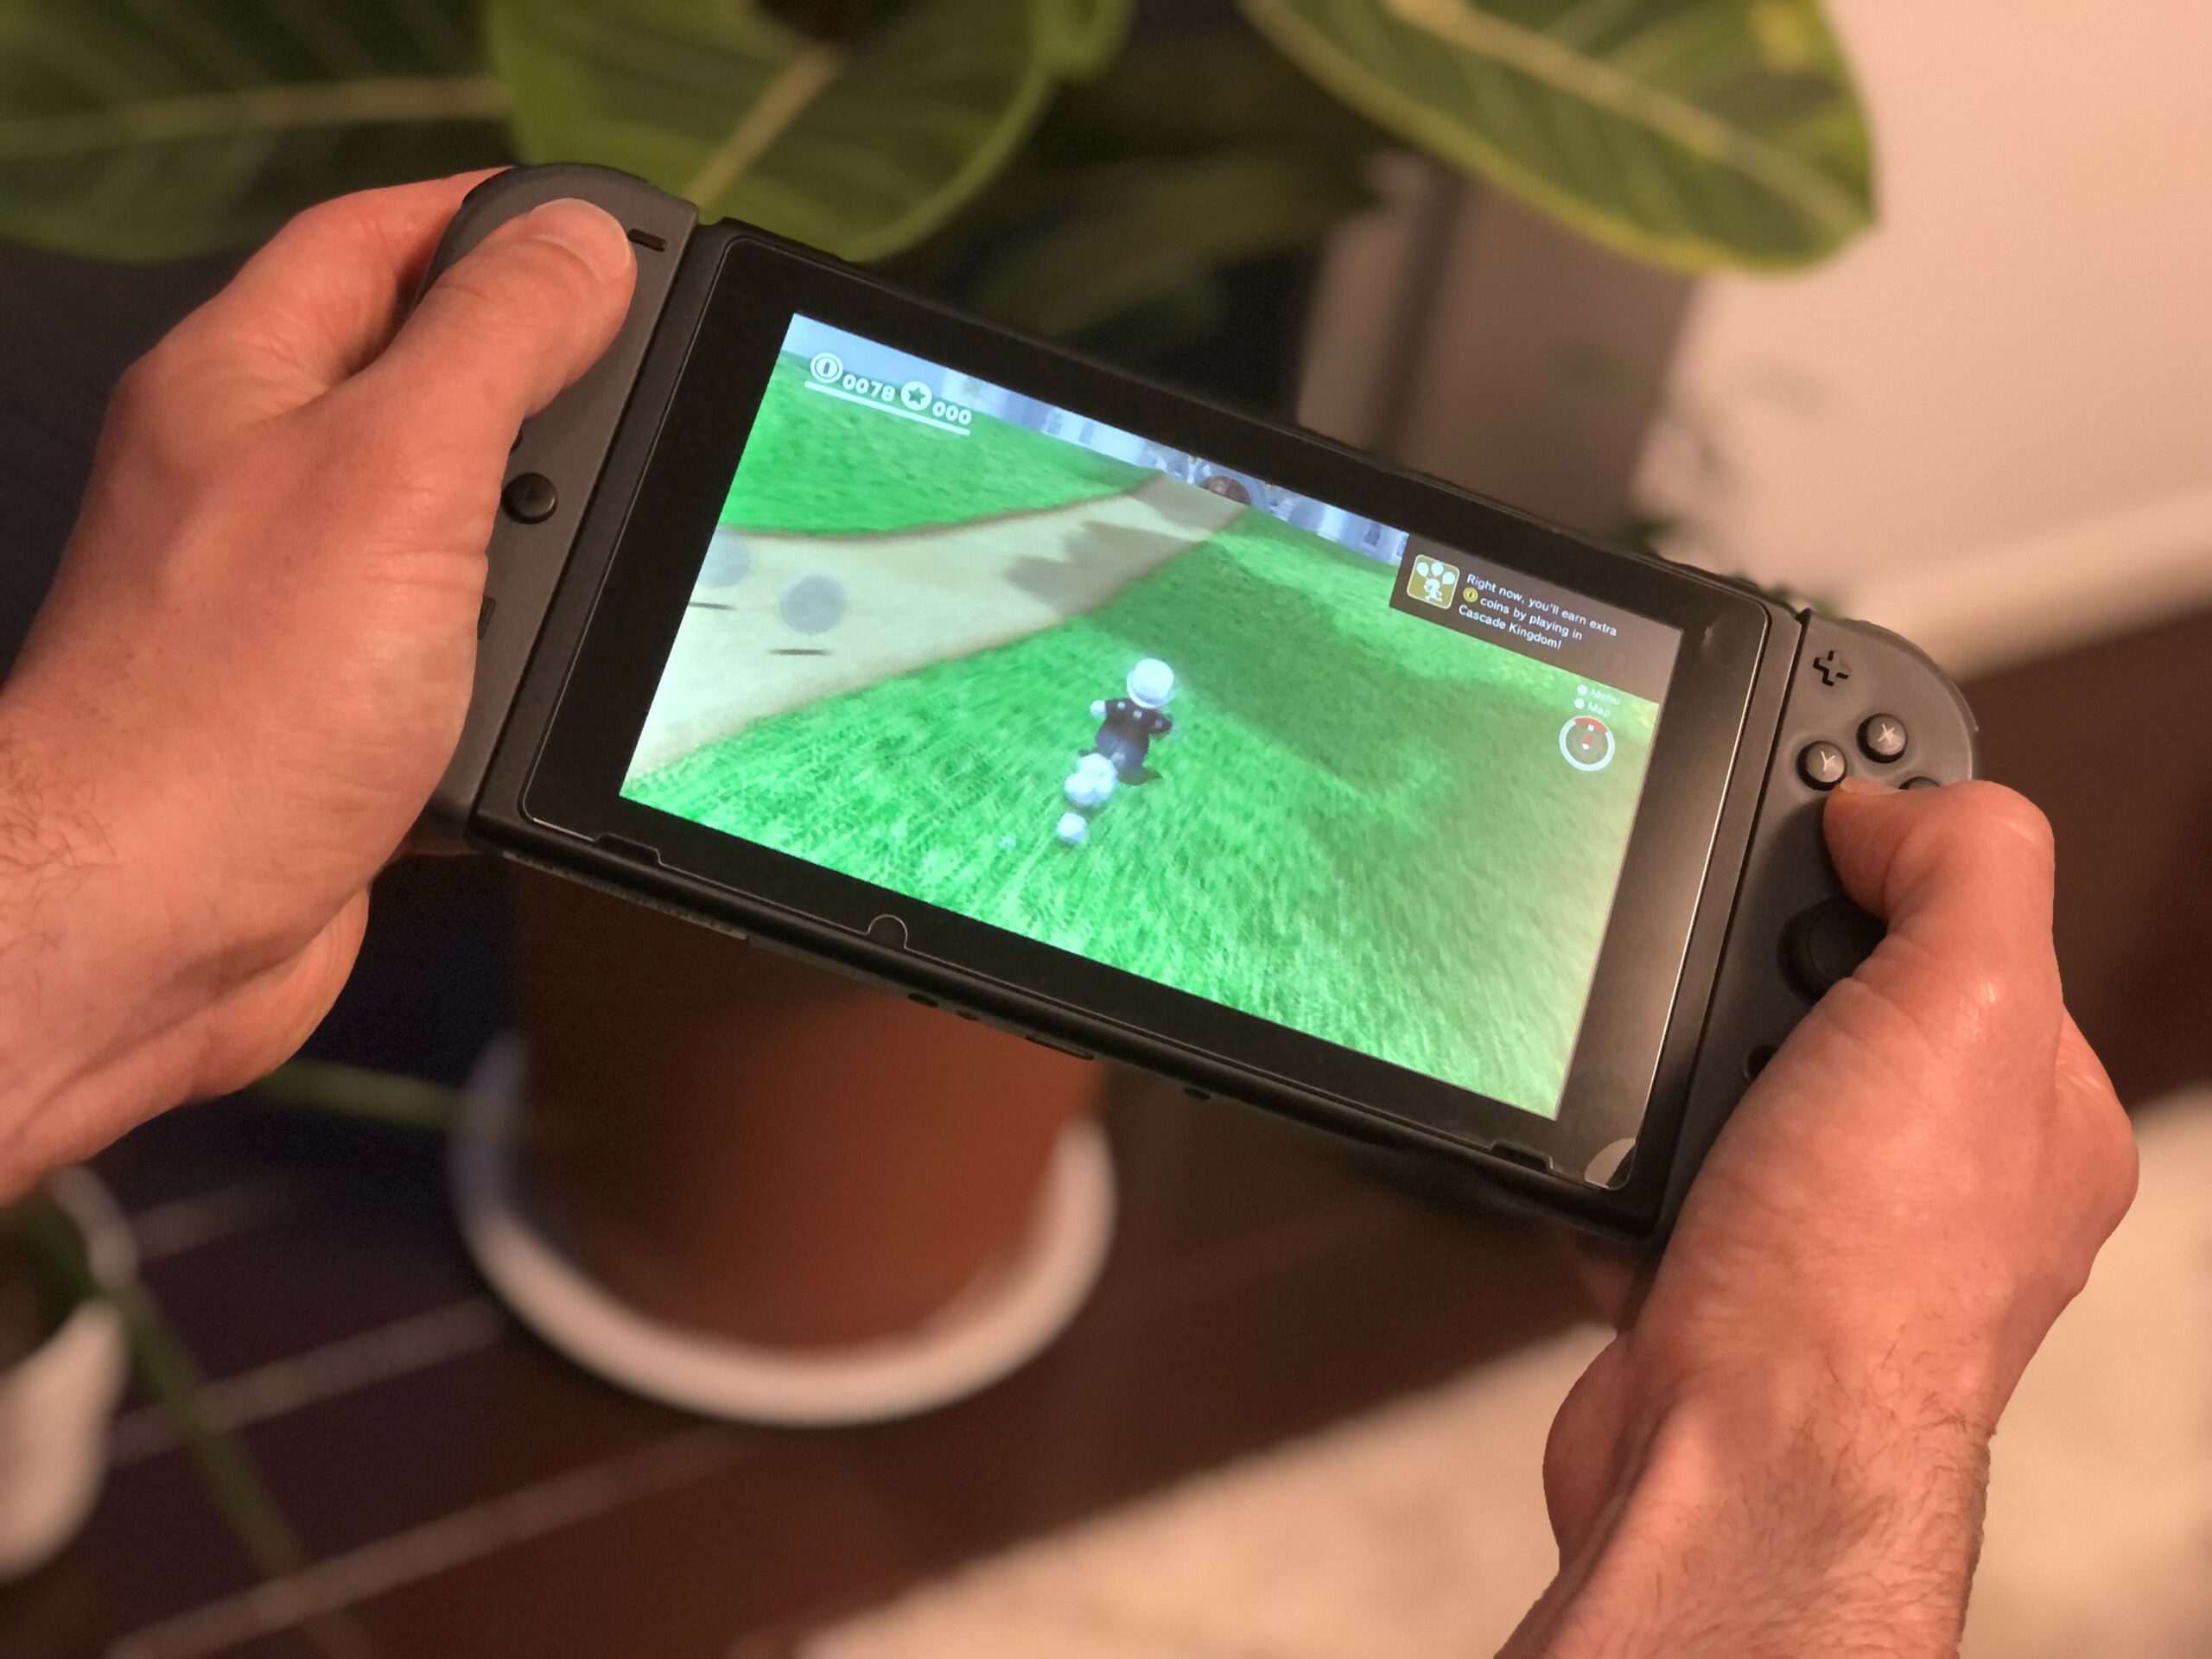 The $200 Version of the Nintendo Switch Is Great: REVIEW